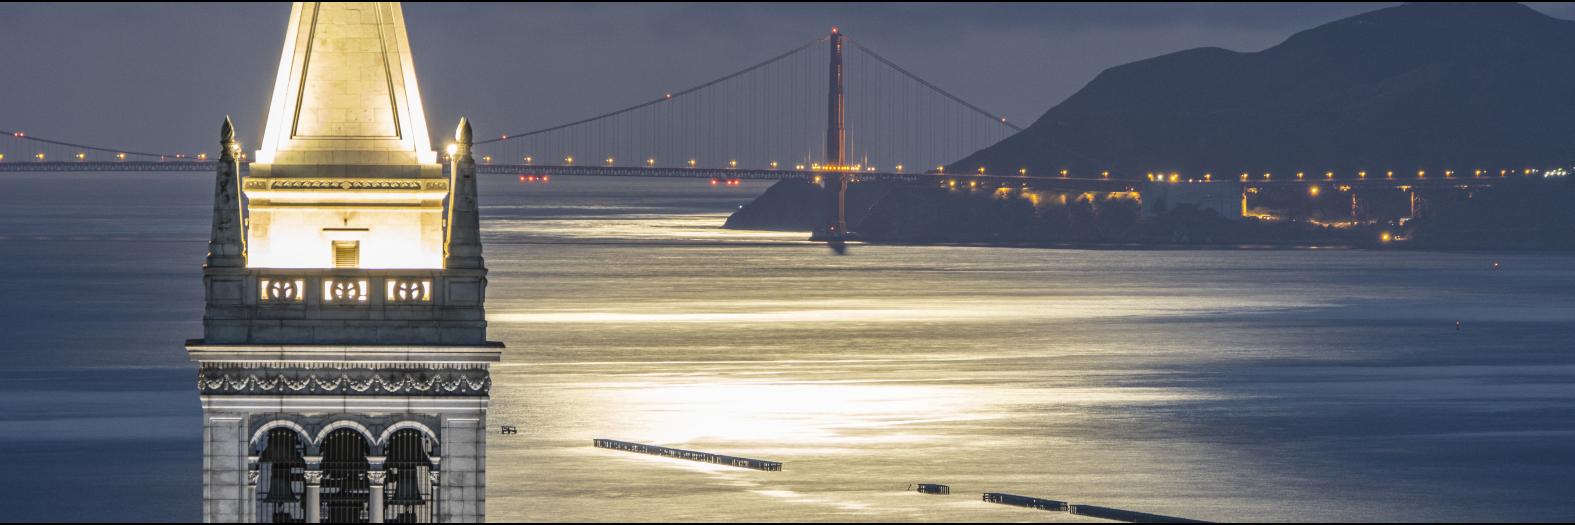 Photo of the Golden Gate Bridge at night, with Berkeley's campanile in the foreground